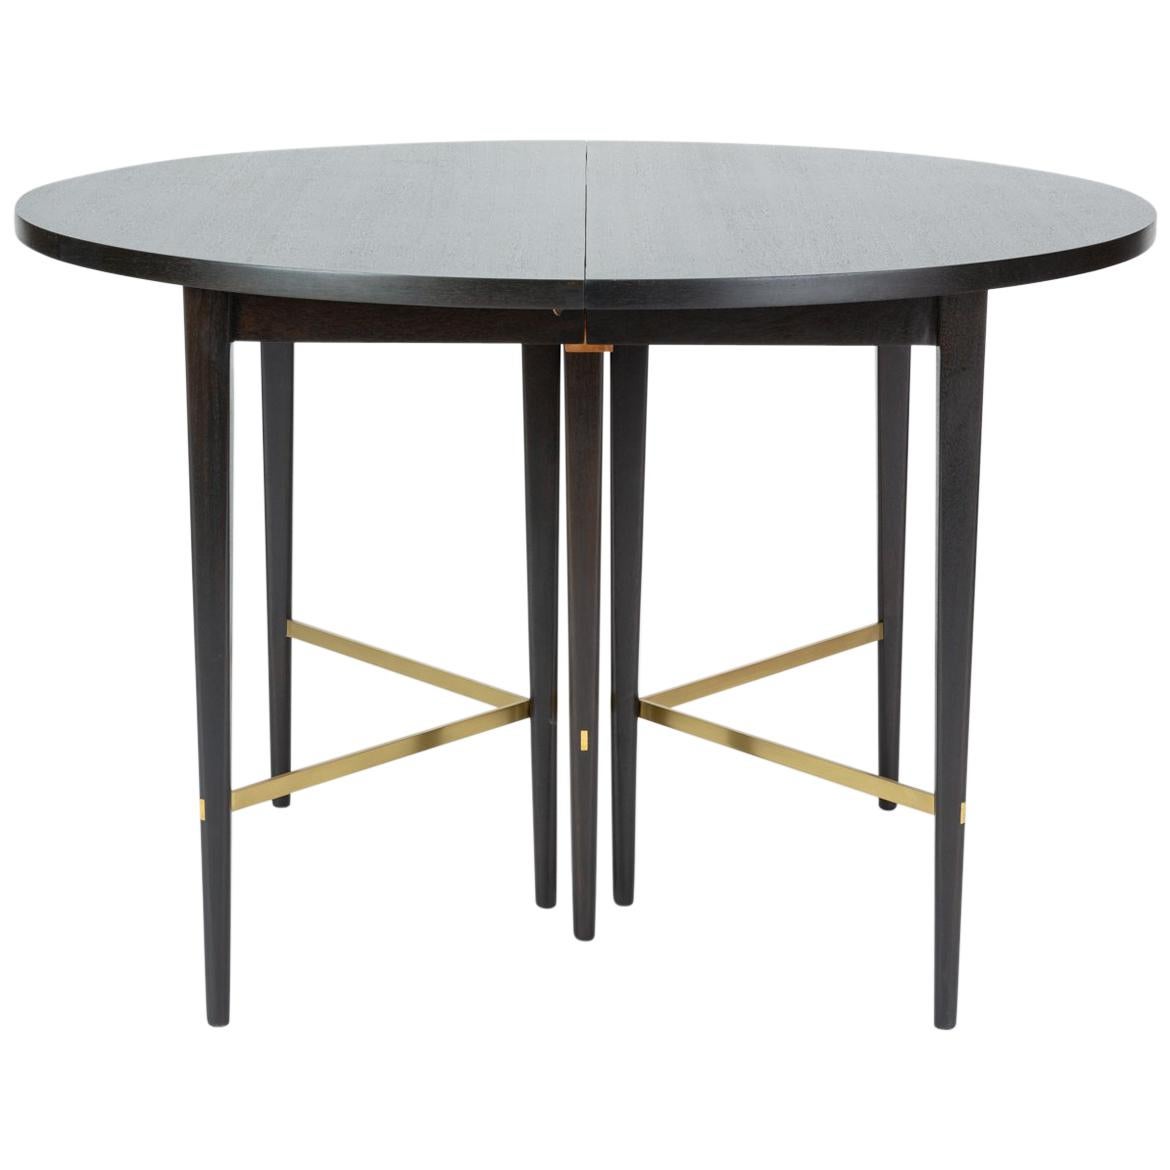 Ebonized Dining Table with Six Leaves by Paul McCobb for Calvin Furniture